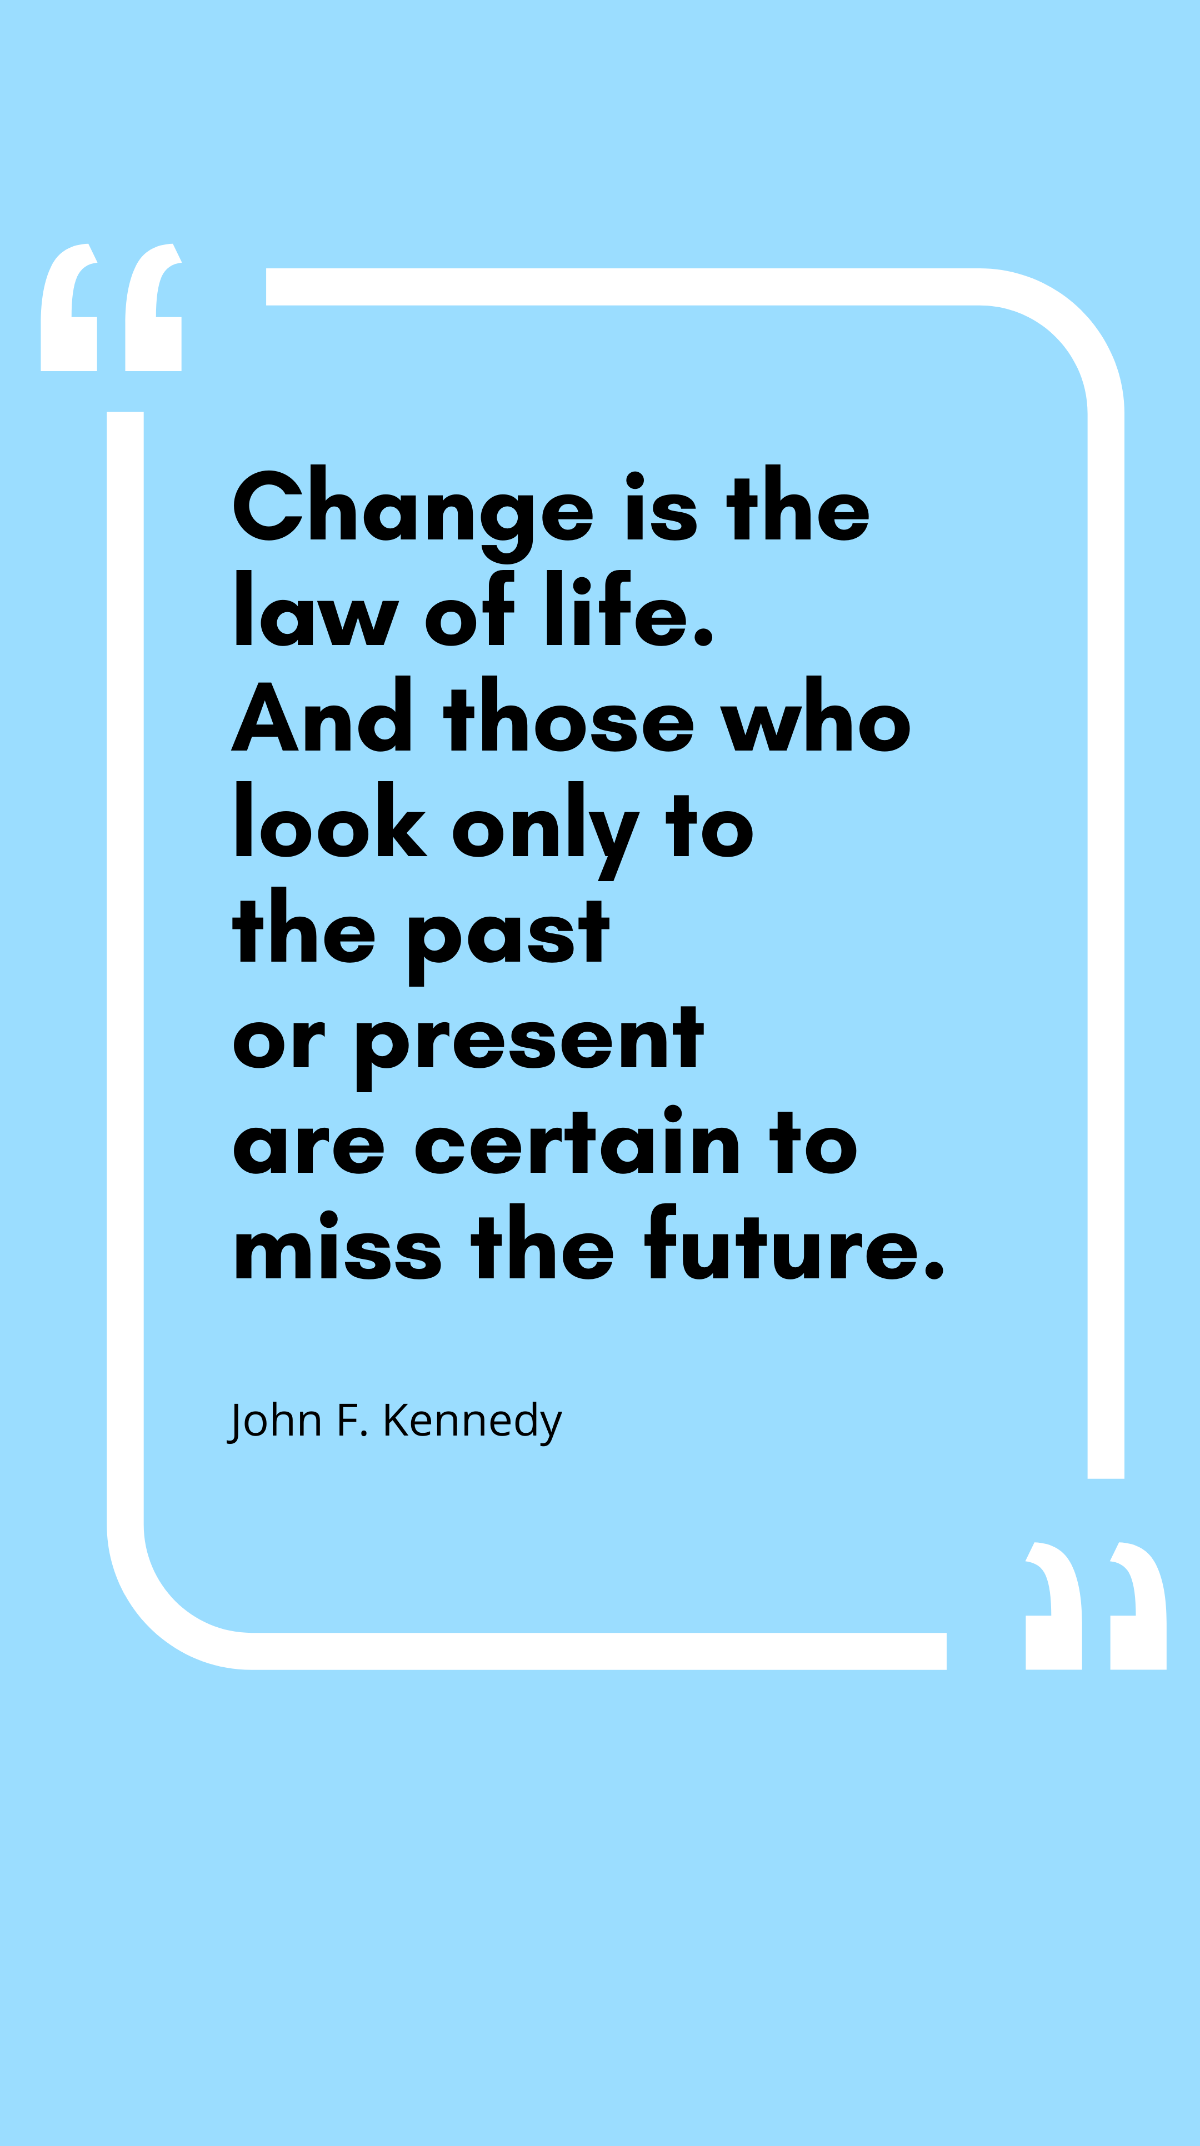 John F. Kennedy - Change is the law of life. And those who look only to the past or present are certain to miss the future. Template